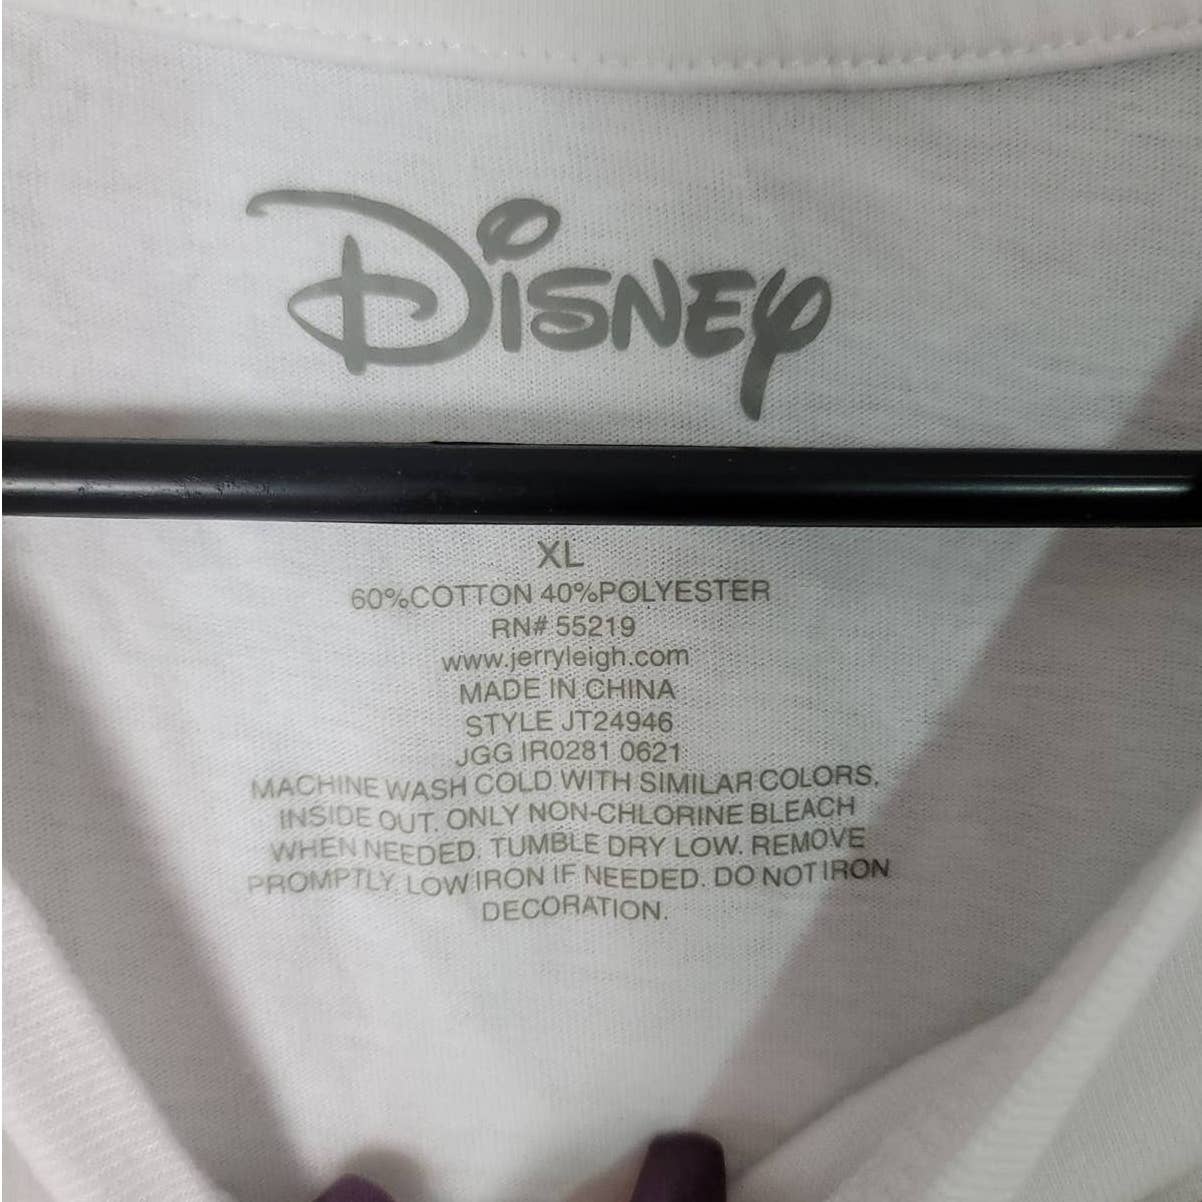 Disney Aristocats Graphic T-Shirt Top White Cropped Short Sleeve Crew Neck XL